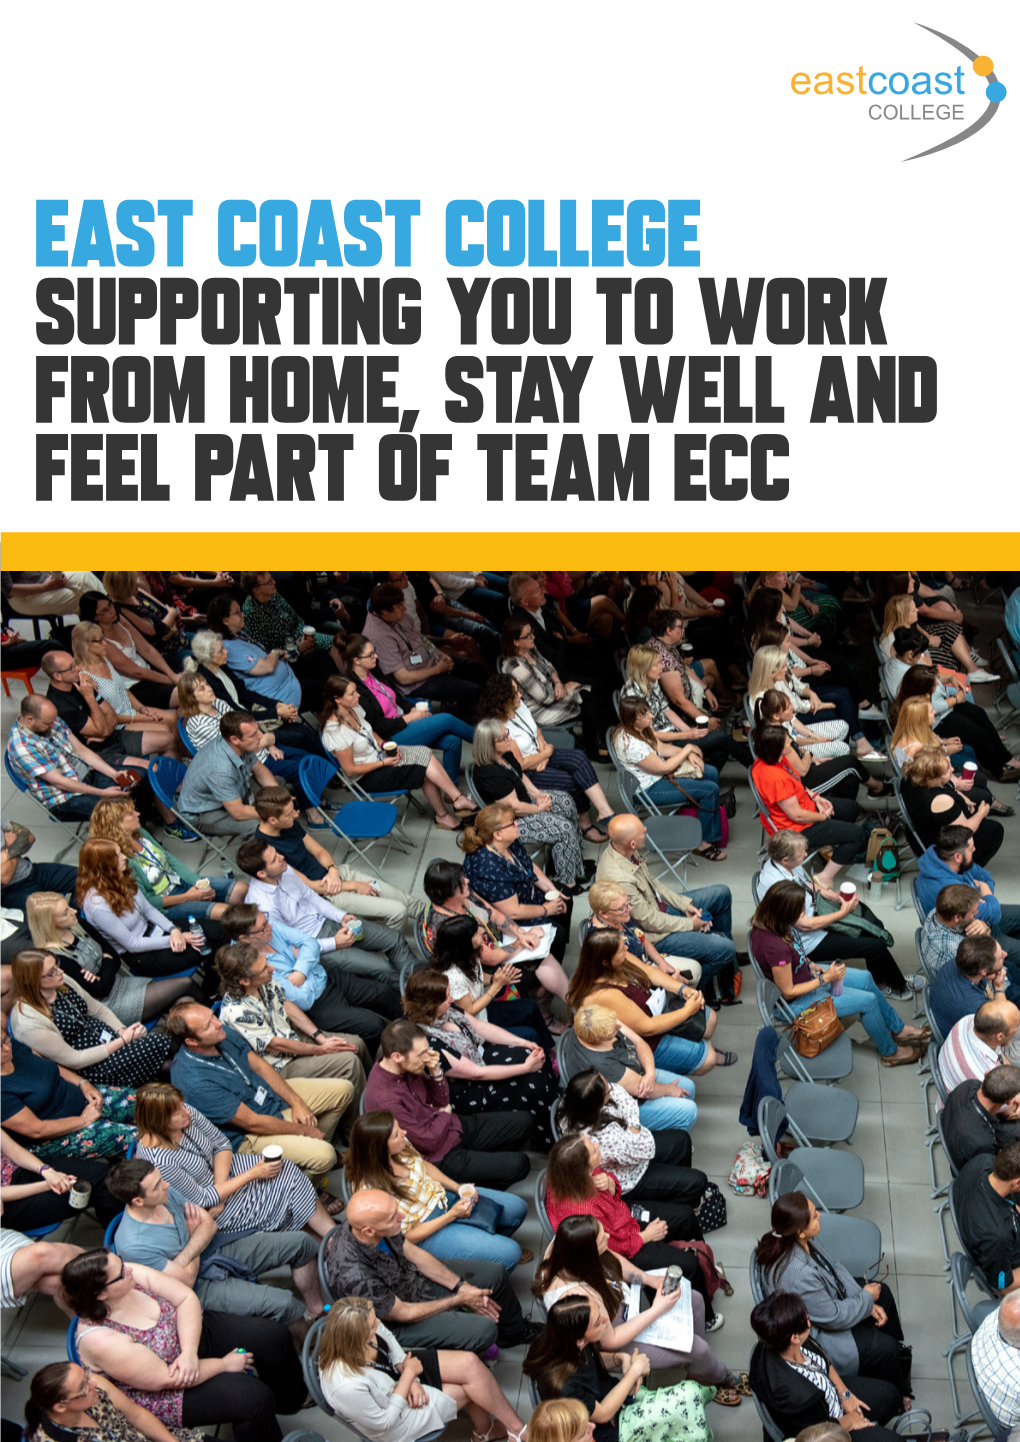 EAST COAST COLLEGE SUPPORTING YOU to WORK from HOME, STAY WELL and FEEL PART of TEAM ECC Purpose